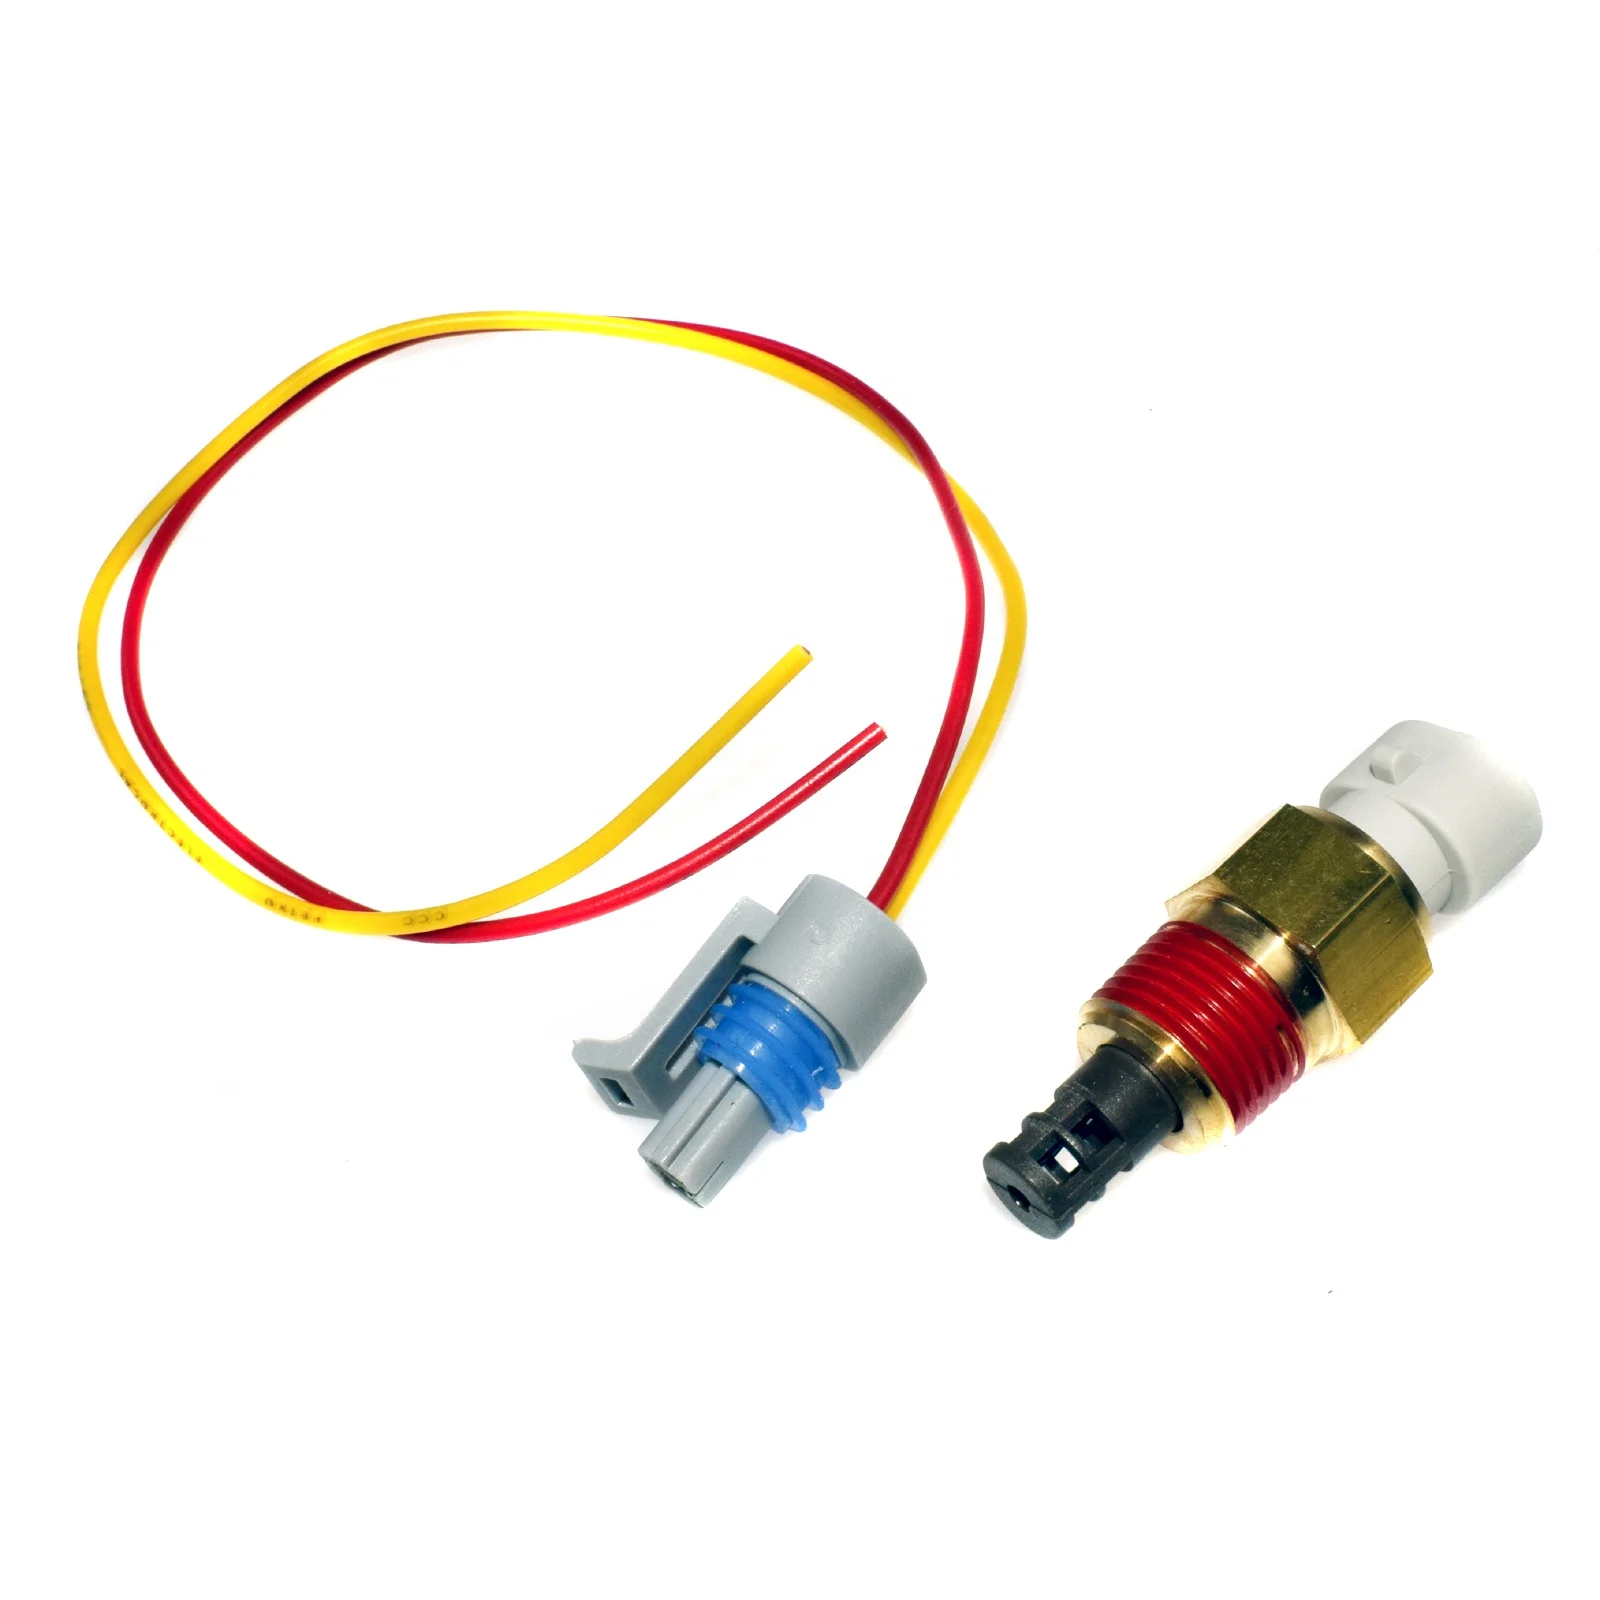 Parts And Accessories Automotive Iat Mat Act 25036751 Intake Air Temperature Sensor Gm With